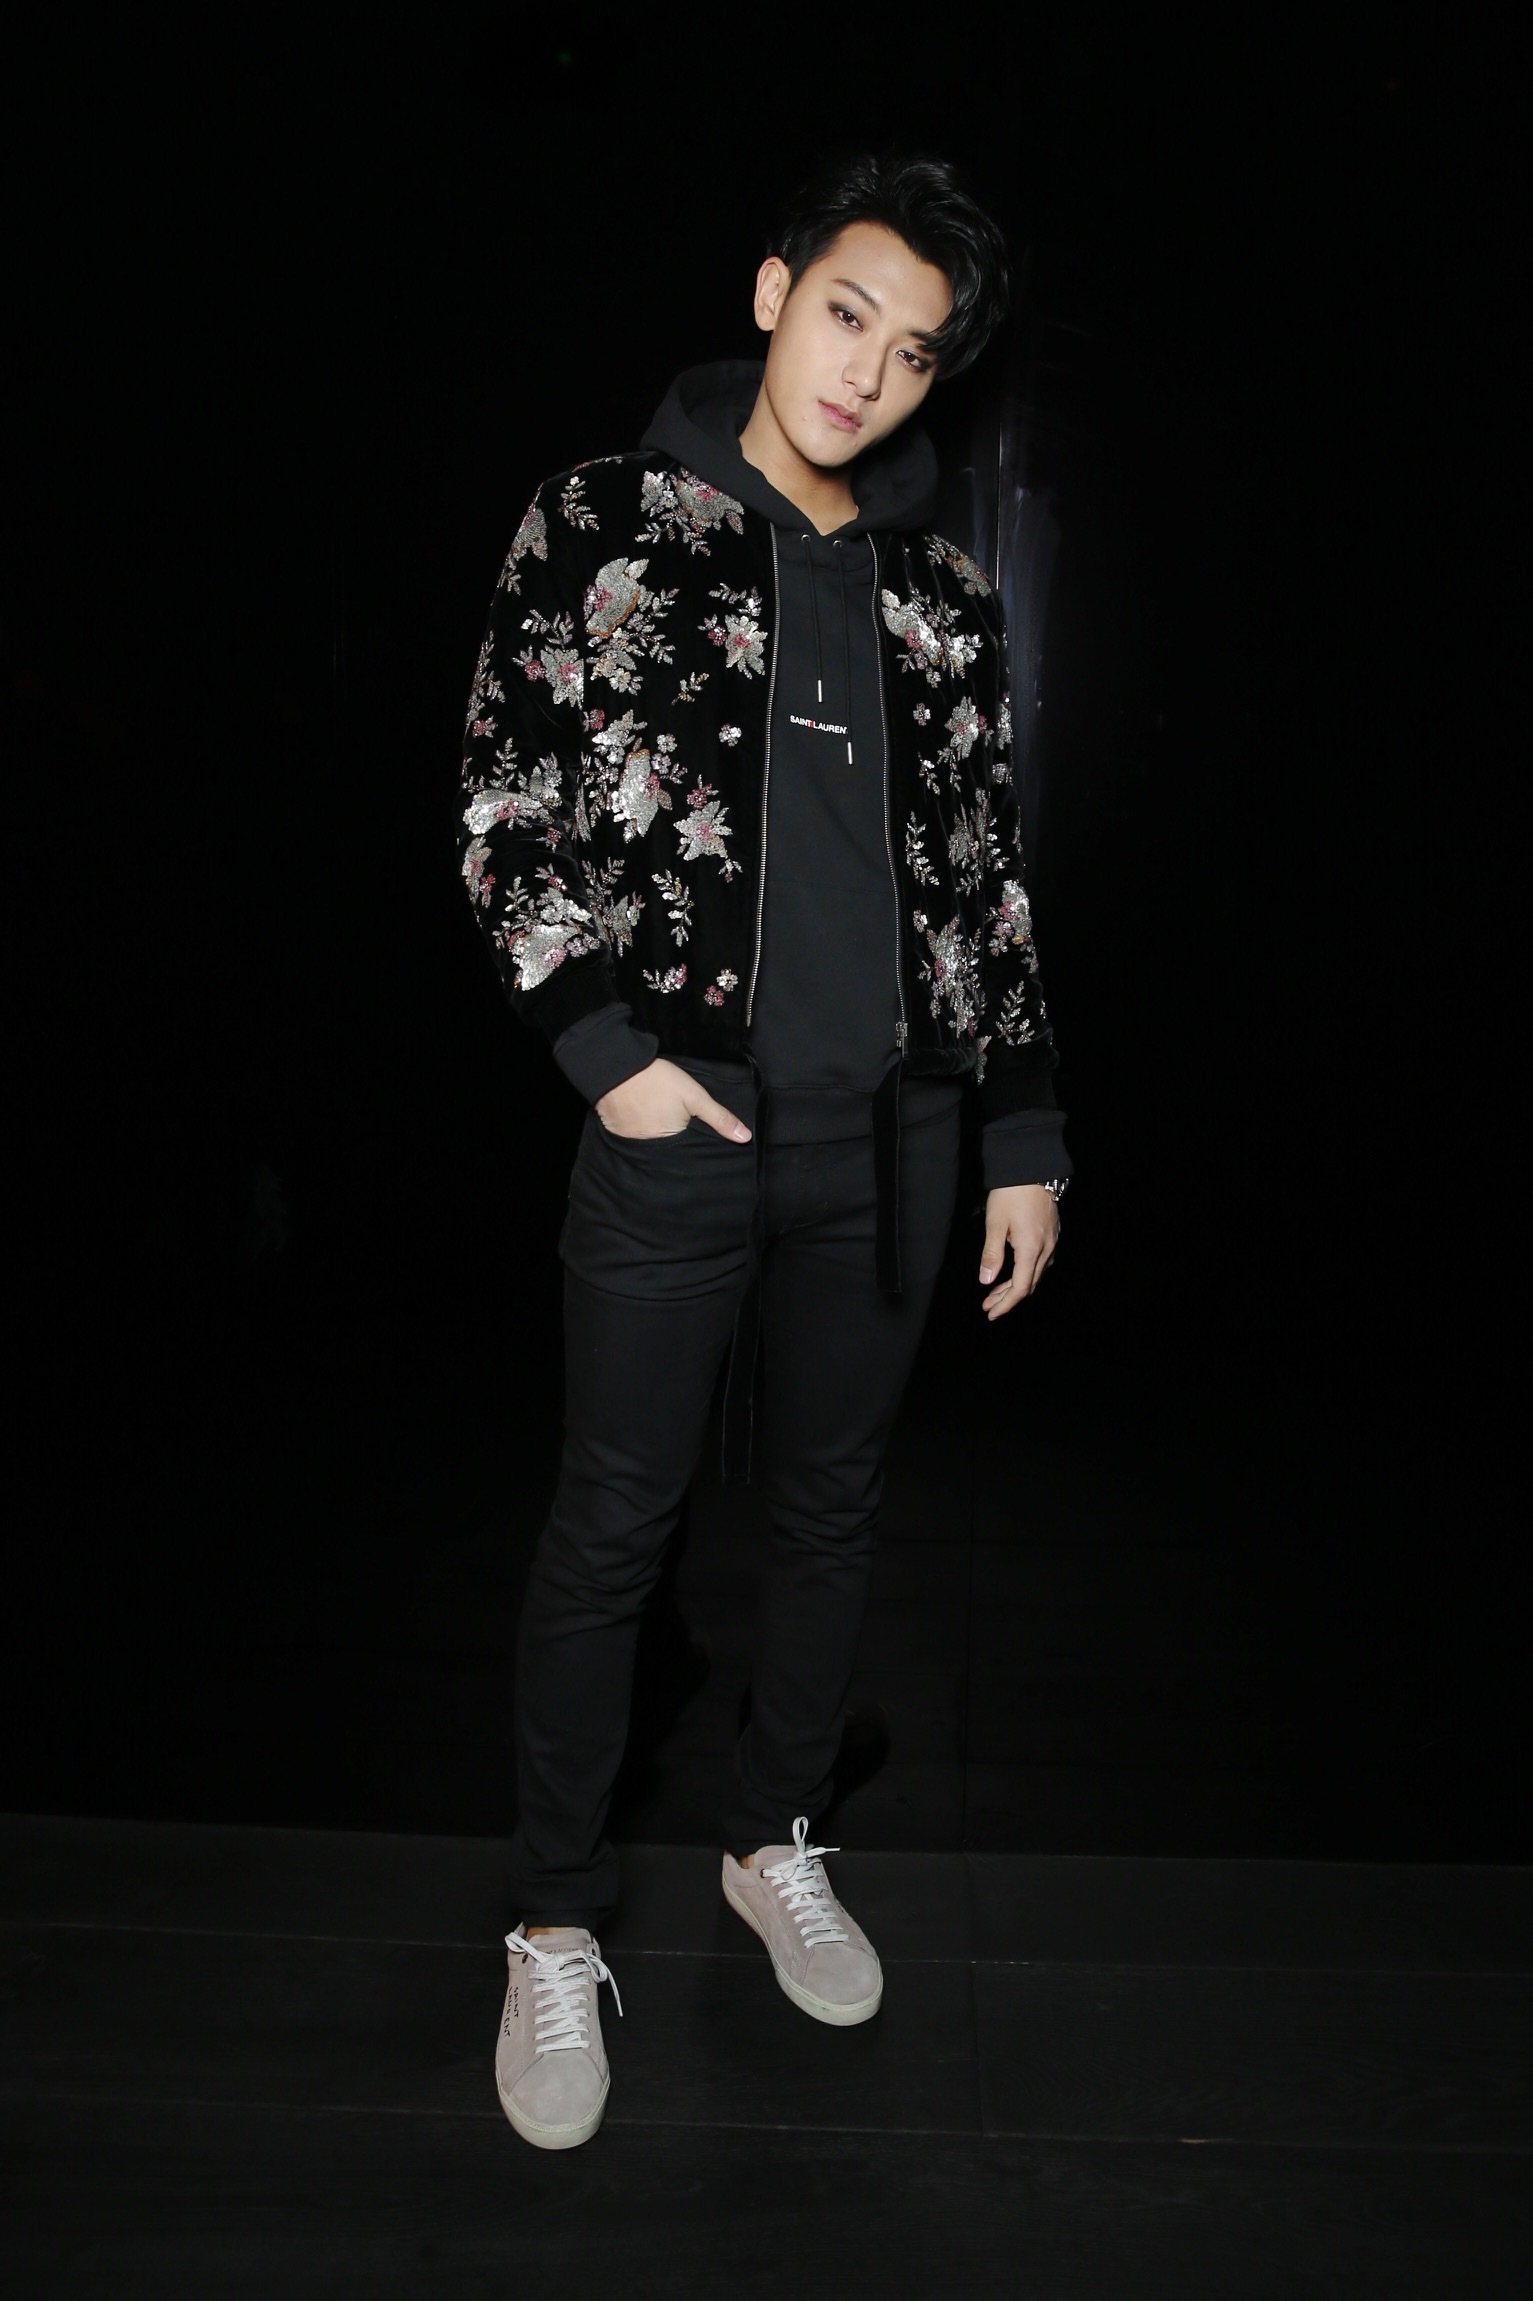 Huang Zitao is a fan of fast cars and designer fashion. Photo: Saint Laurent